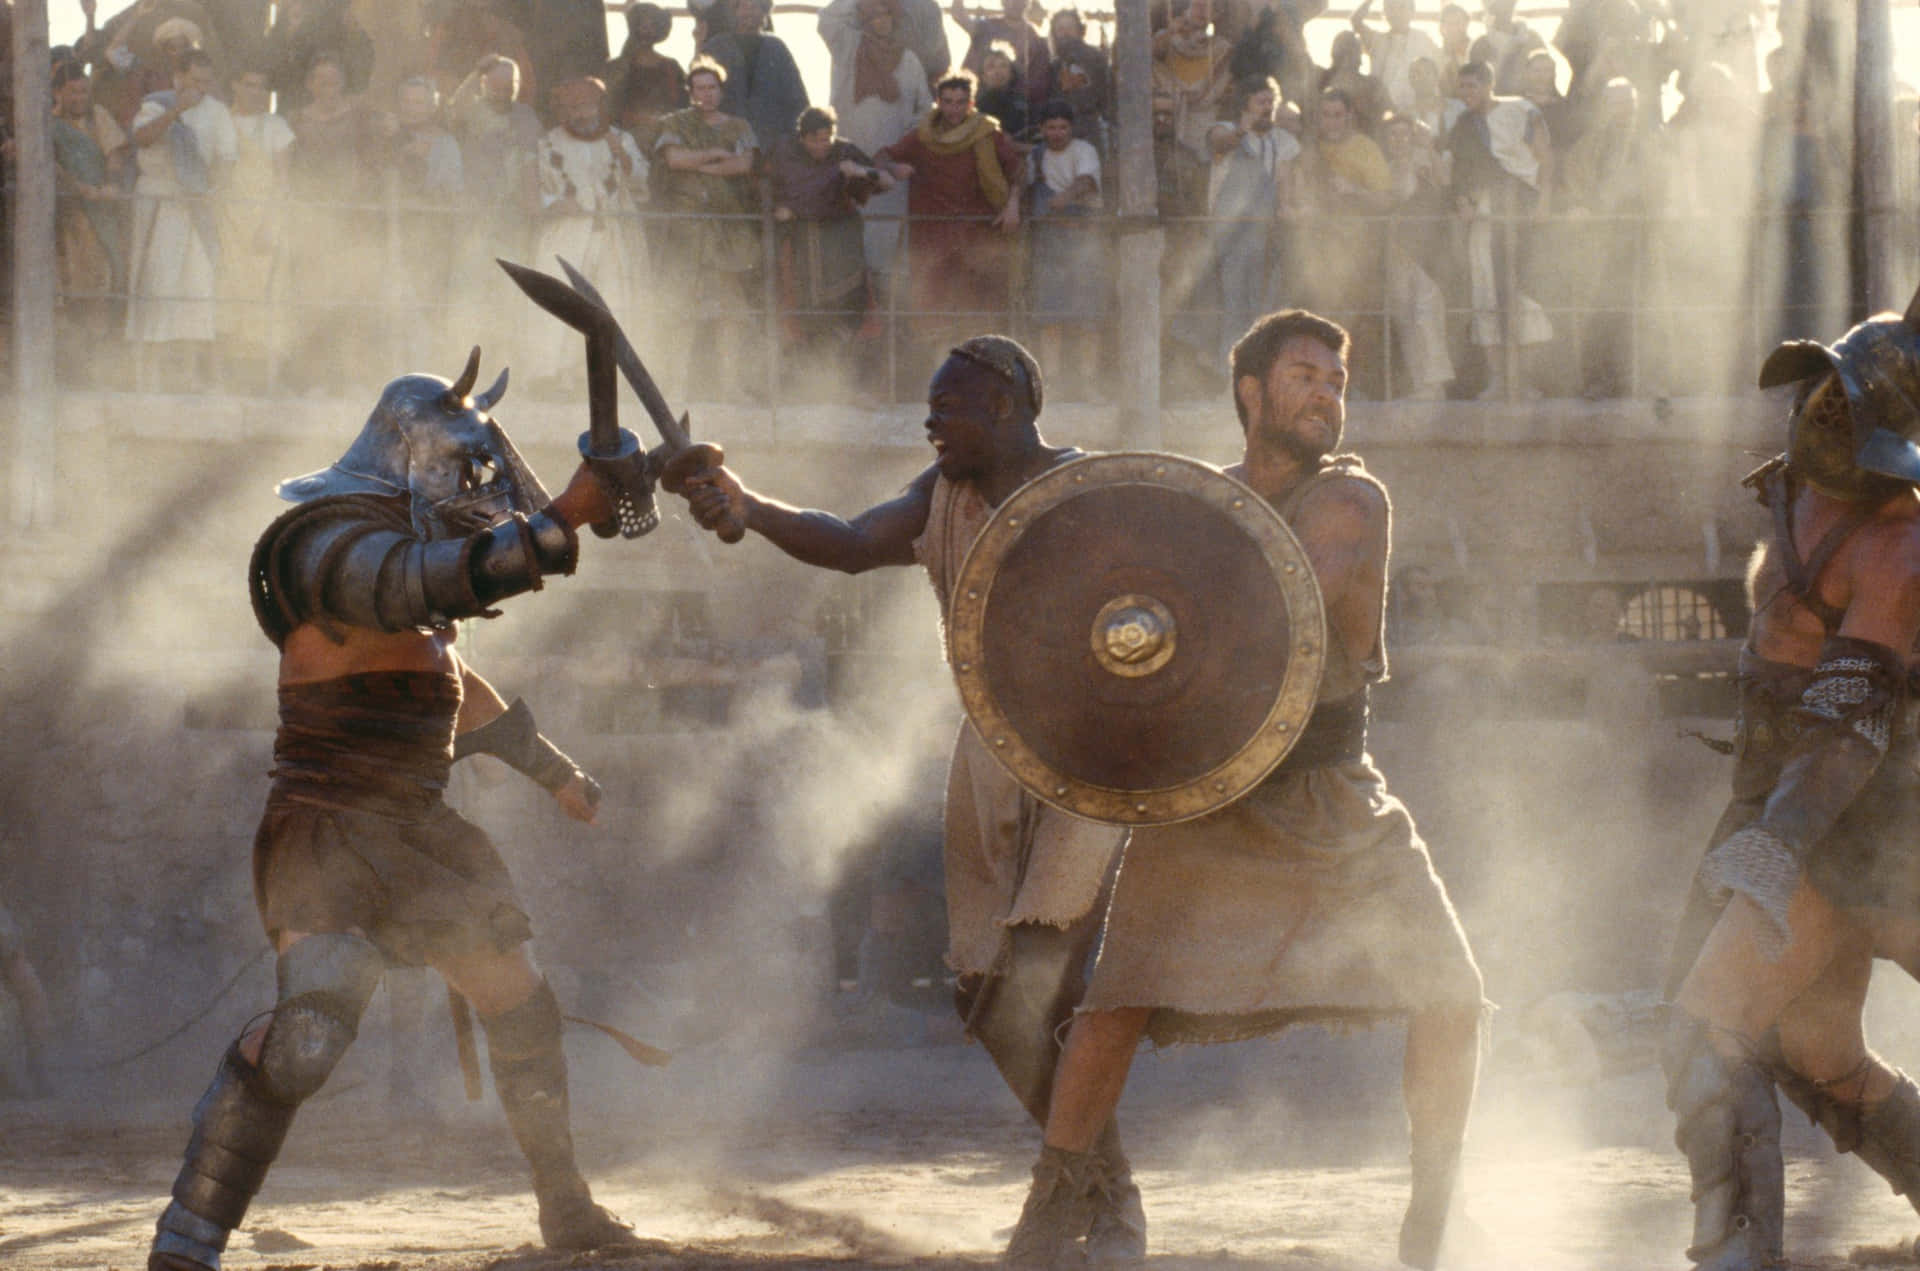 A Group Of Men In Armor Fighting In A Stadium